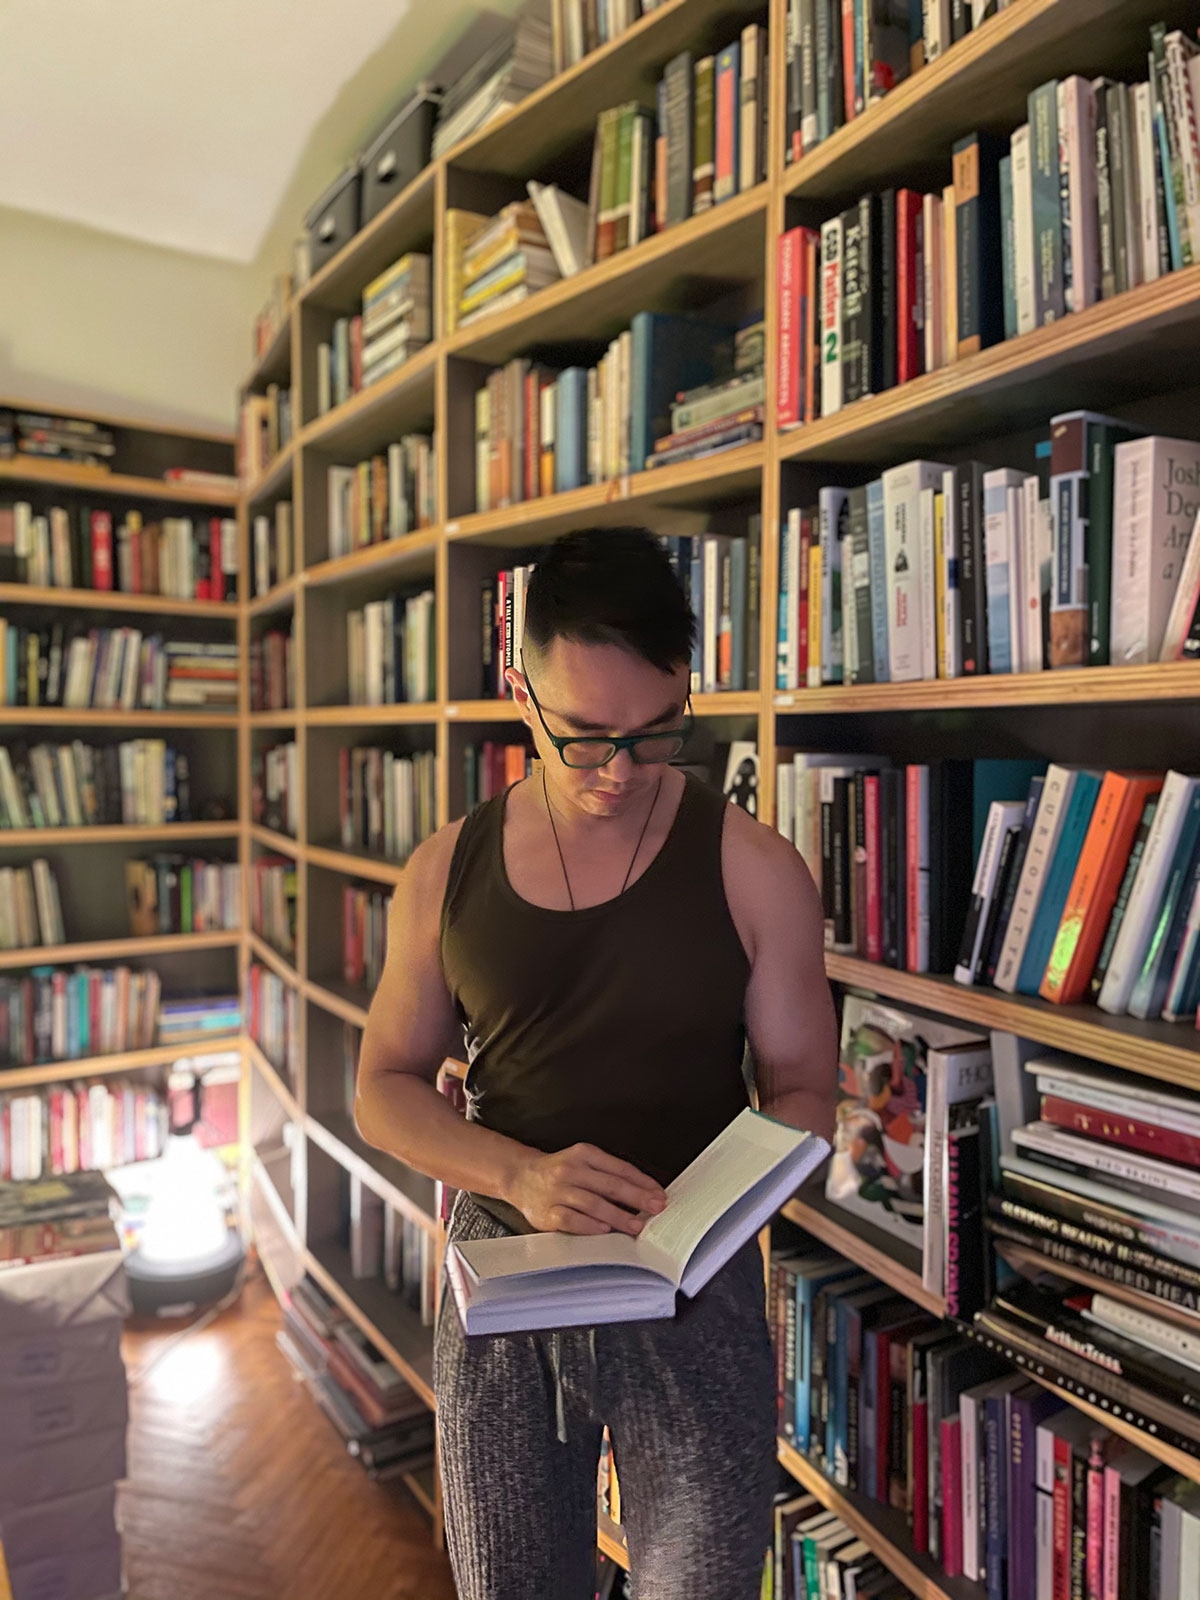 The artist stands in front of many bookcases, holding an open book. 